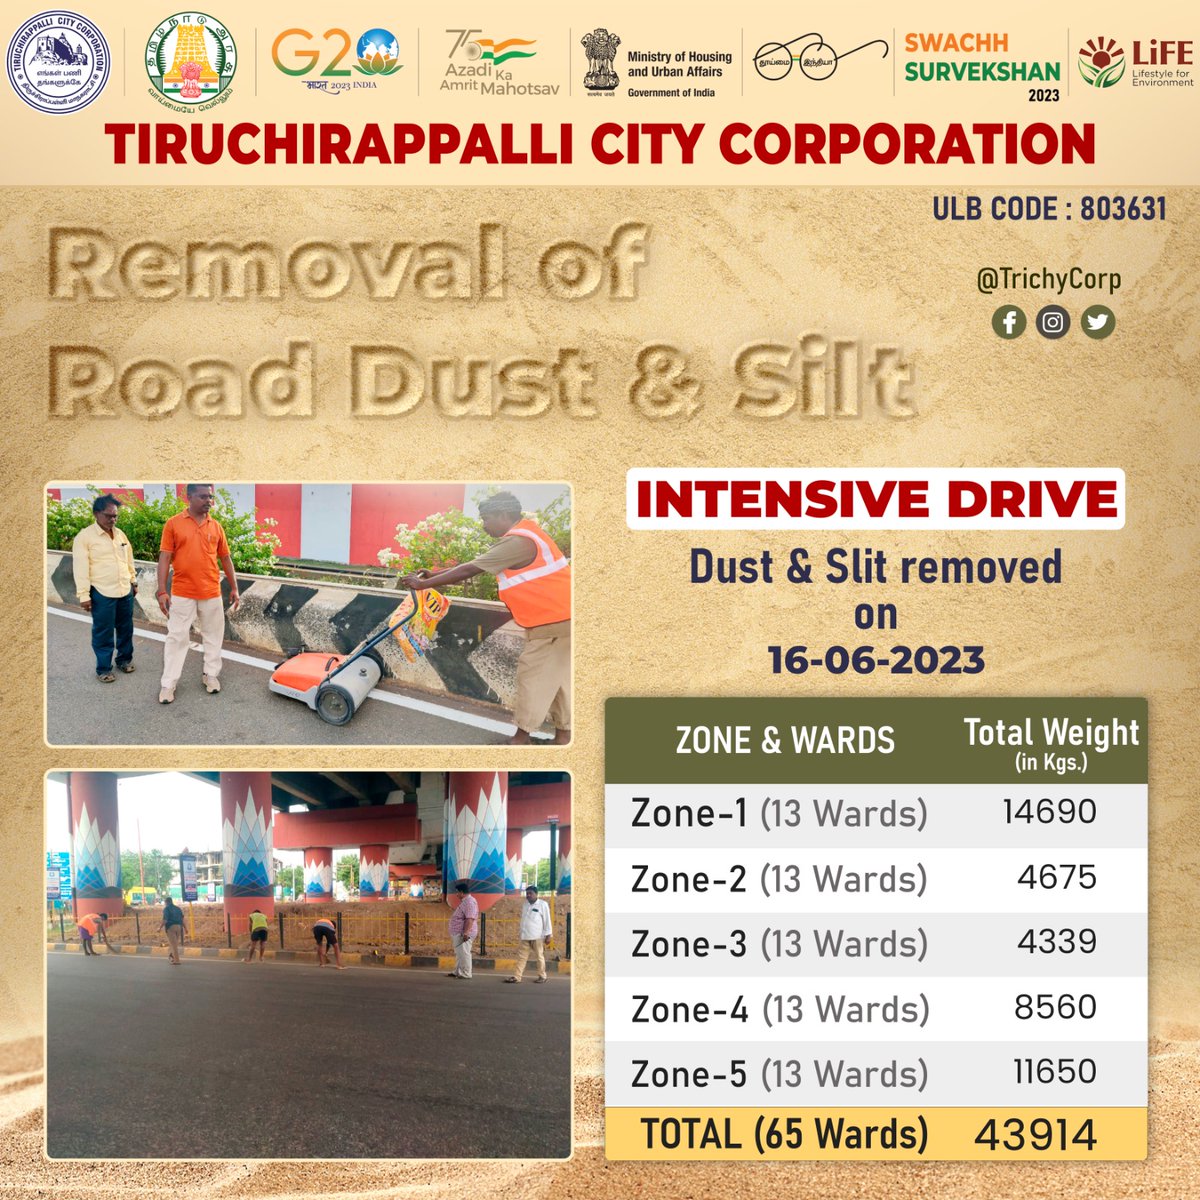 Removal of Road Dust & Silt

#TrichyCorporation #LetsKeepTrichyClean #OperationCleanSweep #SwachhBharatMission #SwachhSurvekshan #SwachhataApp #CleanCityCampaign #Mywastemyresponsibilty #RRR4LiFE #ChooseLiFE #IndiaVsGarbage #MissionLiFE